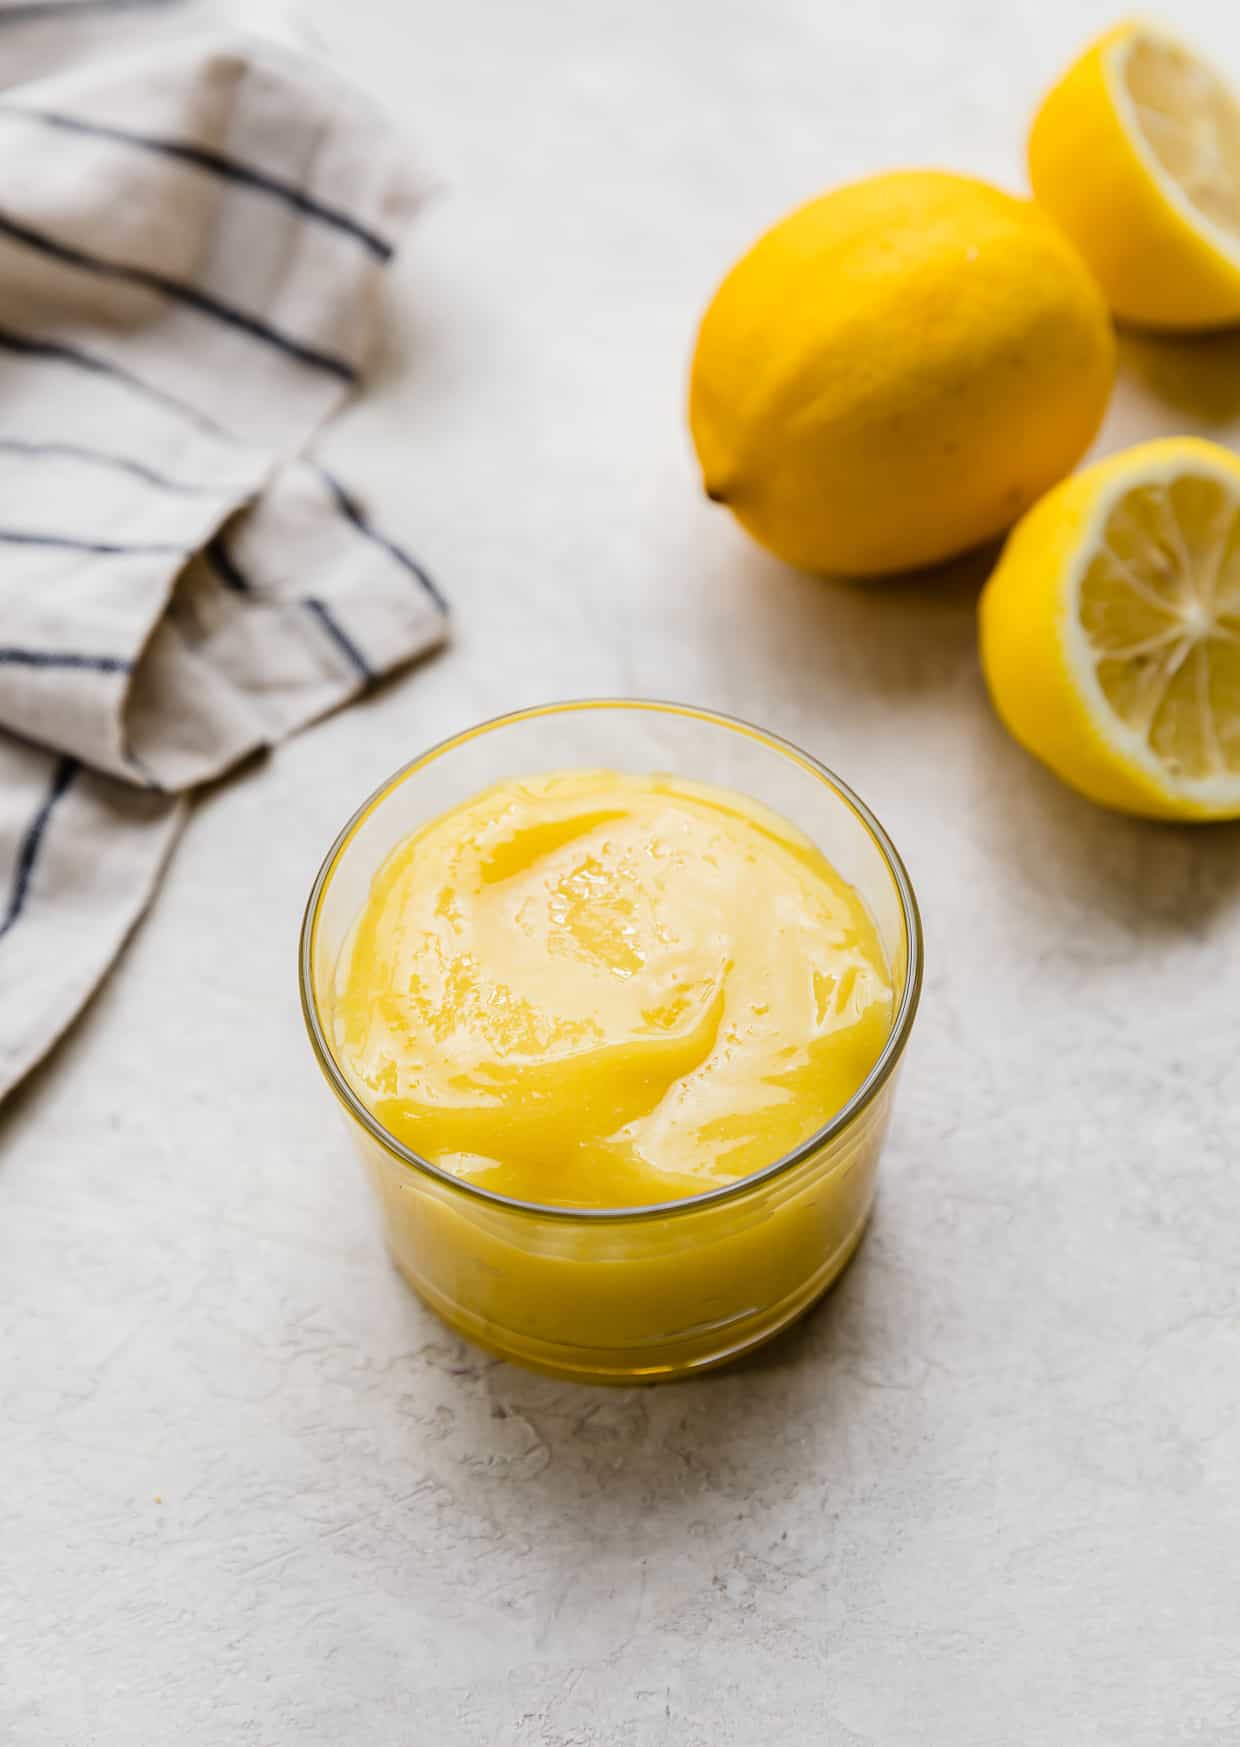 A homemade Lemon Curd Recipe in a glass cup on a light gray background with a full lemon and two lemon halves in the background.